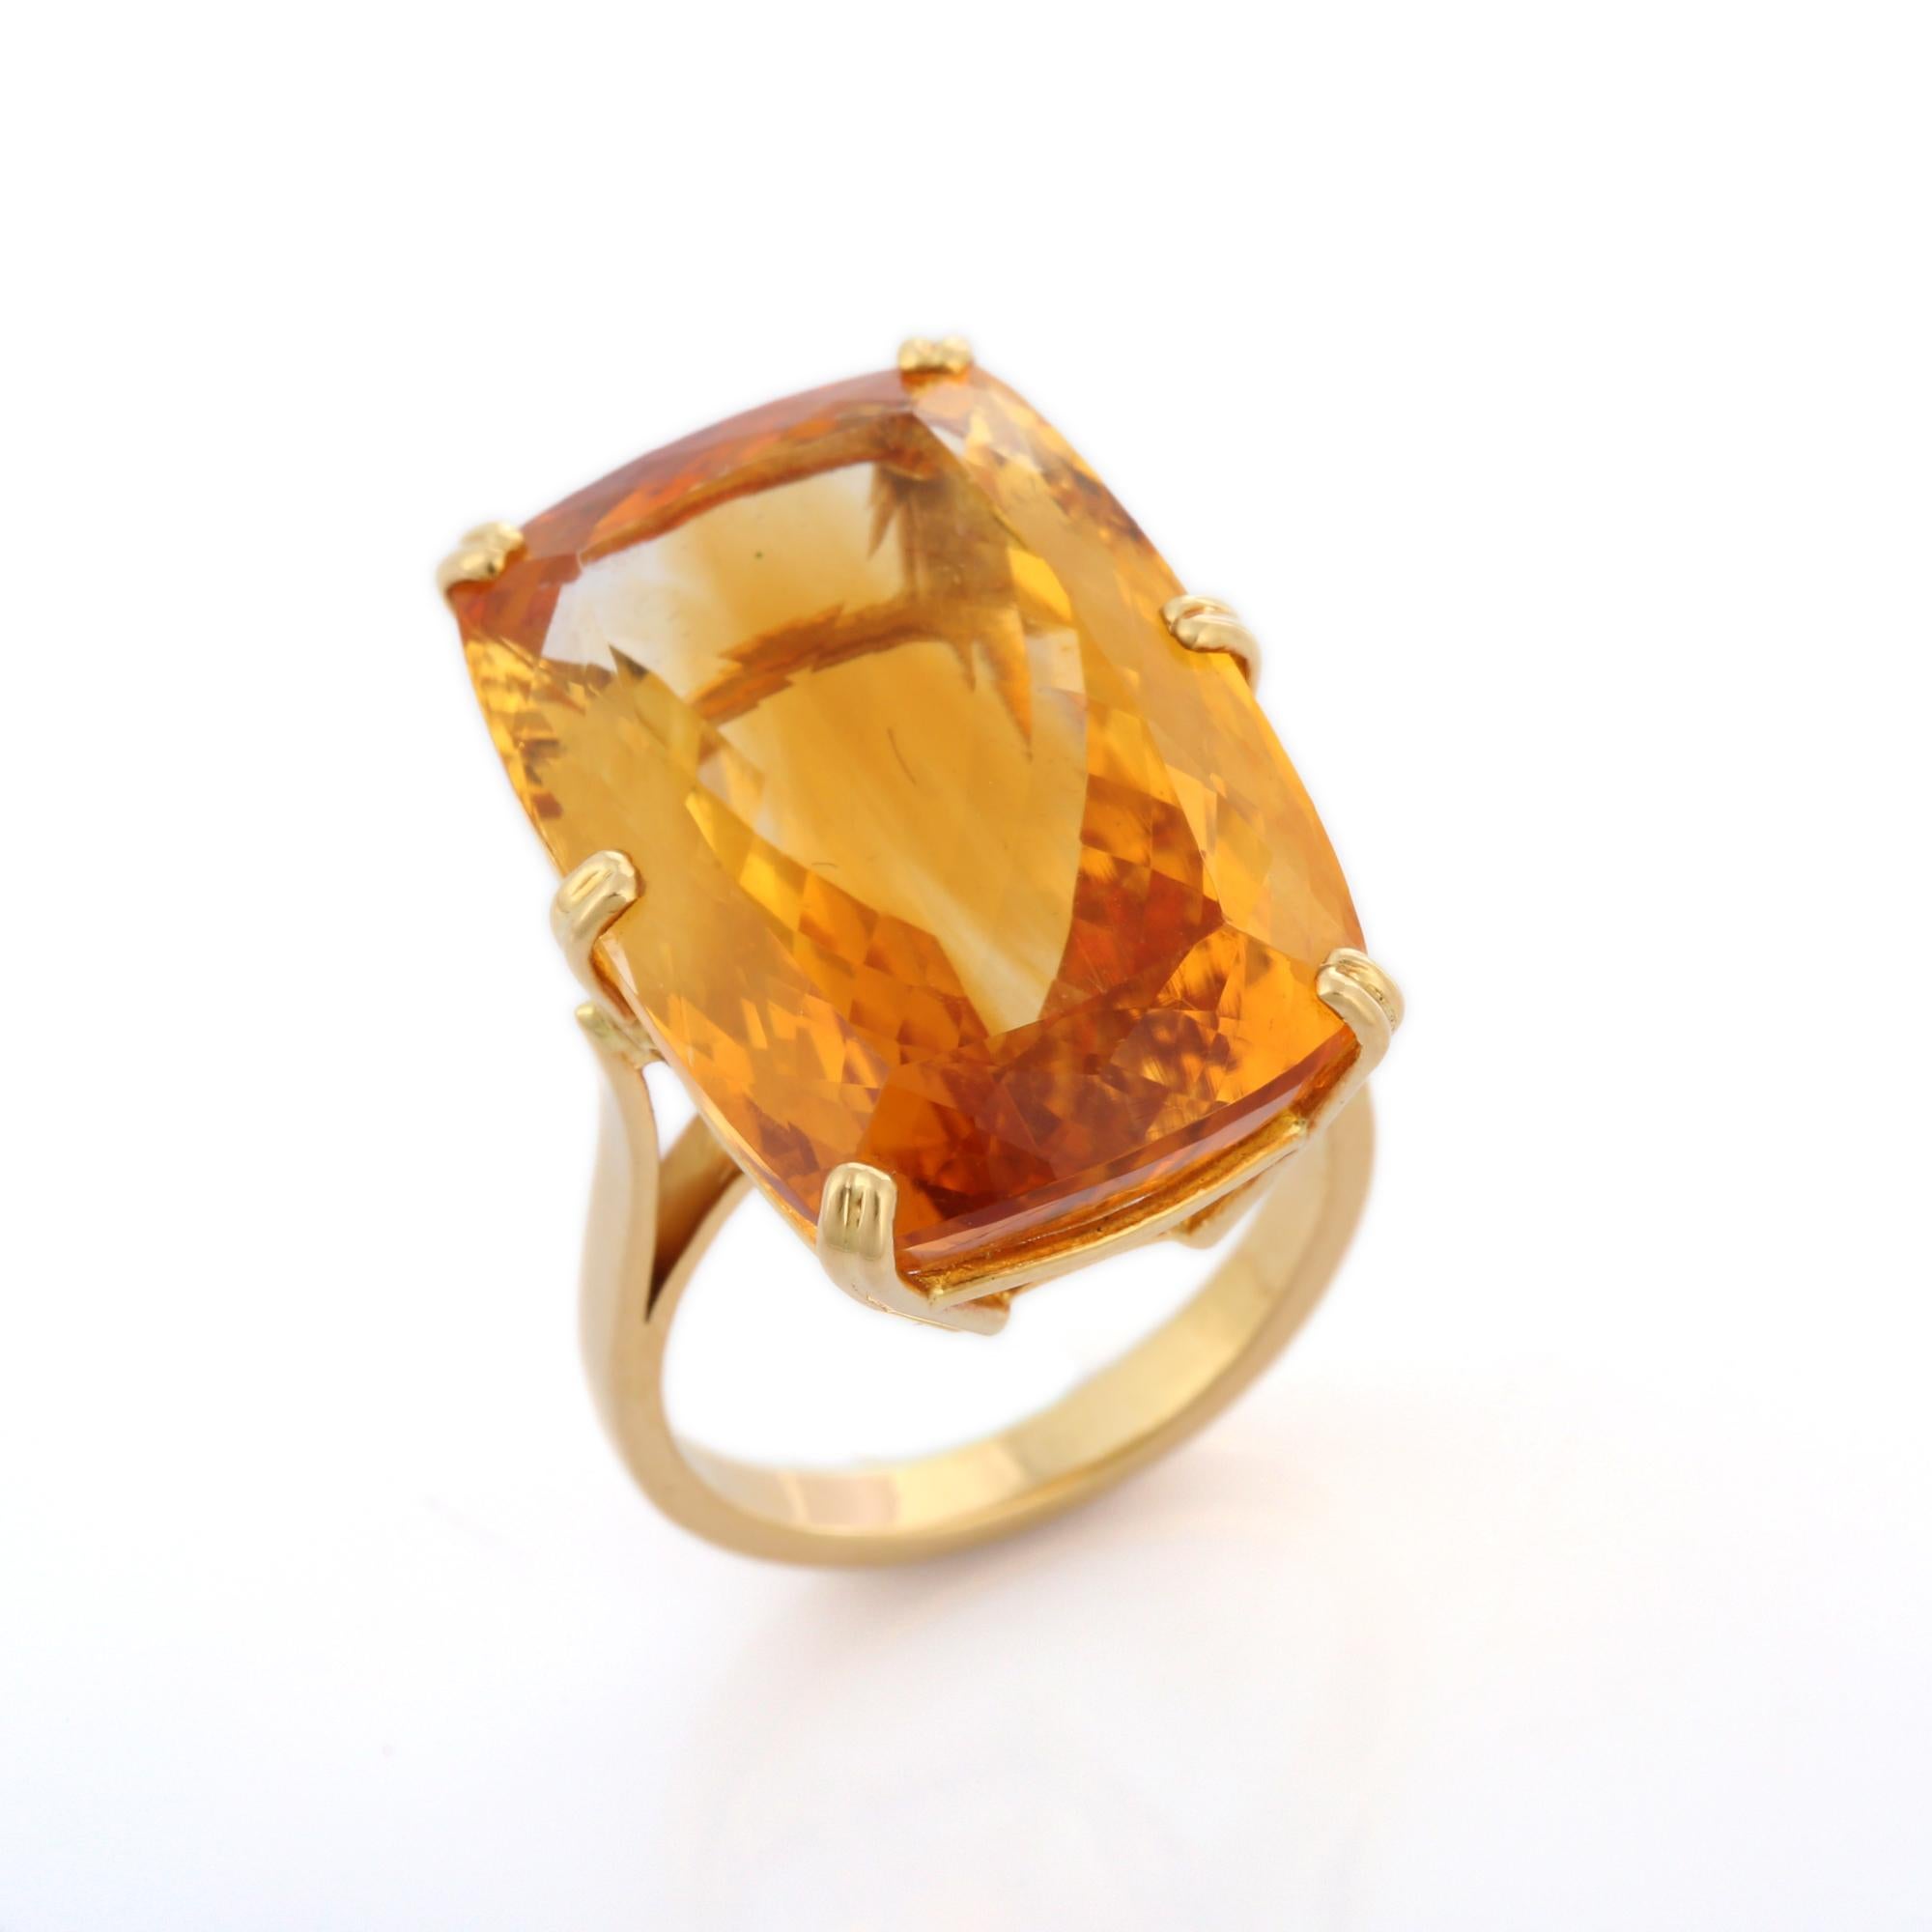 For Sale:  28.8 Ct Cushion Cut Citrine Gemstone Cocktail Ring in 18K Yellow Gold 9